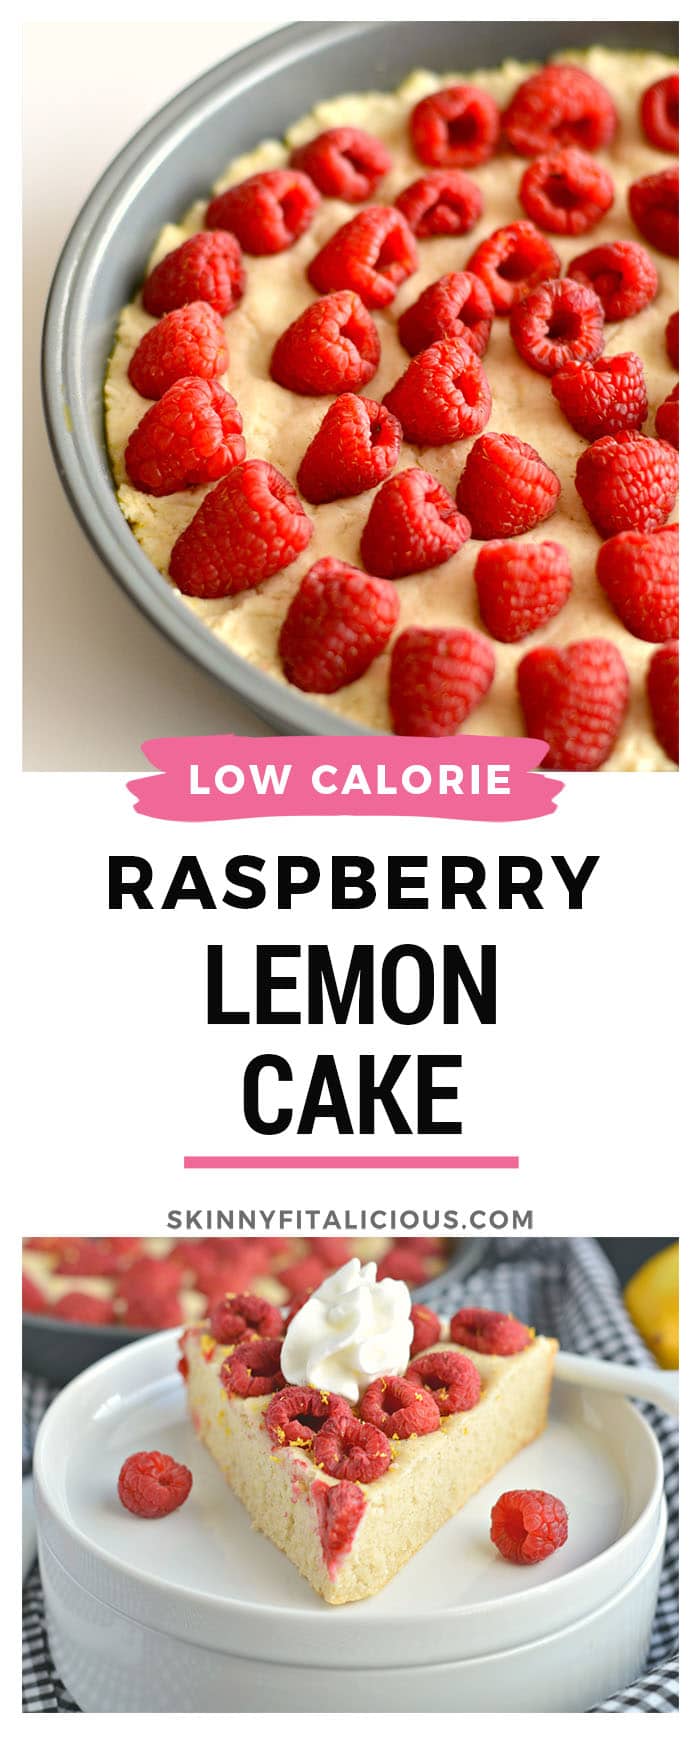 Healthy Raspberry Lemon Cake made with tart lemon juice, Greek yogurt, rings of sweet raspberries and no refined sugar! This elegant cake is the perfect balance of sweet and tart. A fancy dessert with no guilt! Gluten Free + Low Calorie